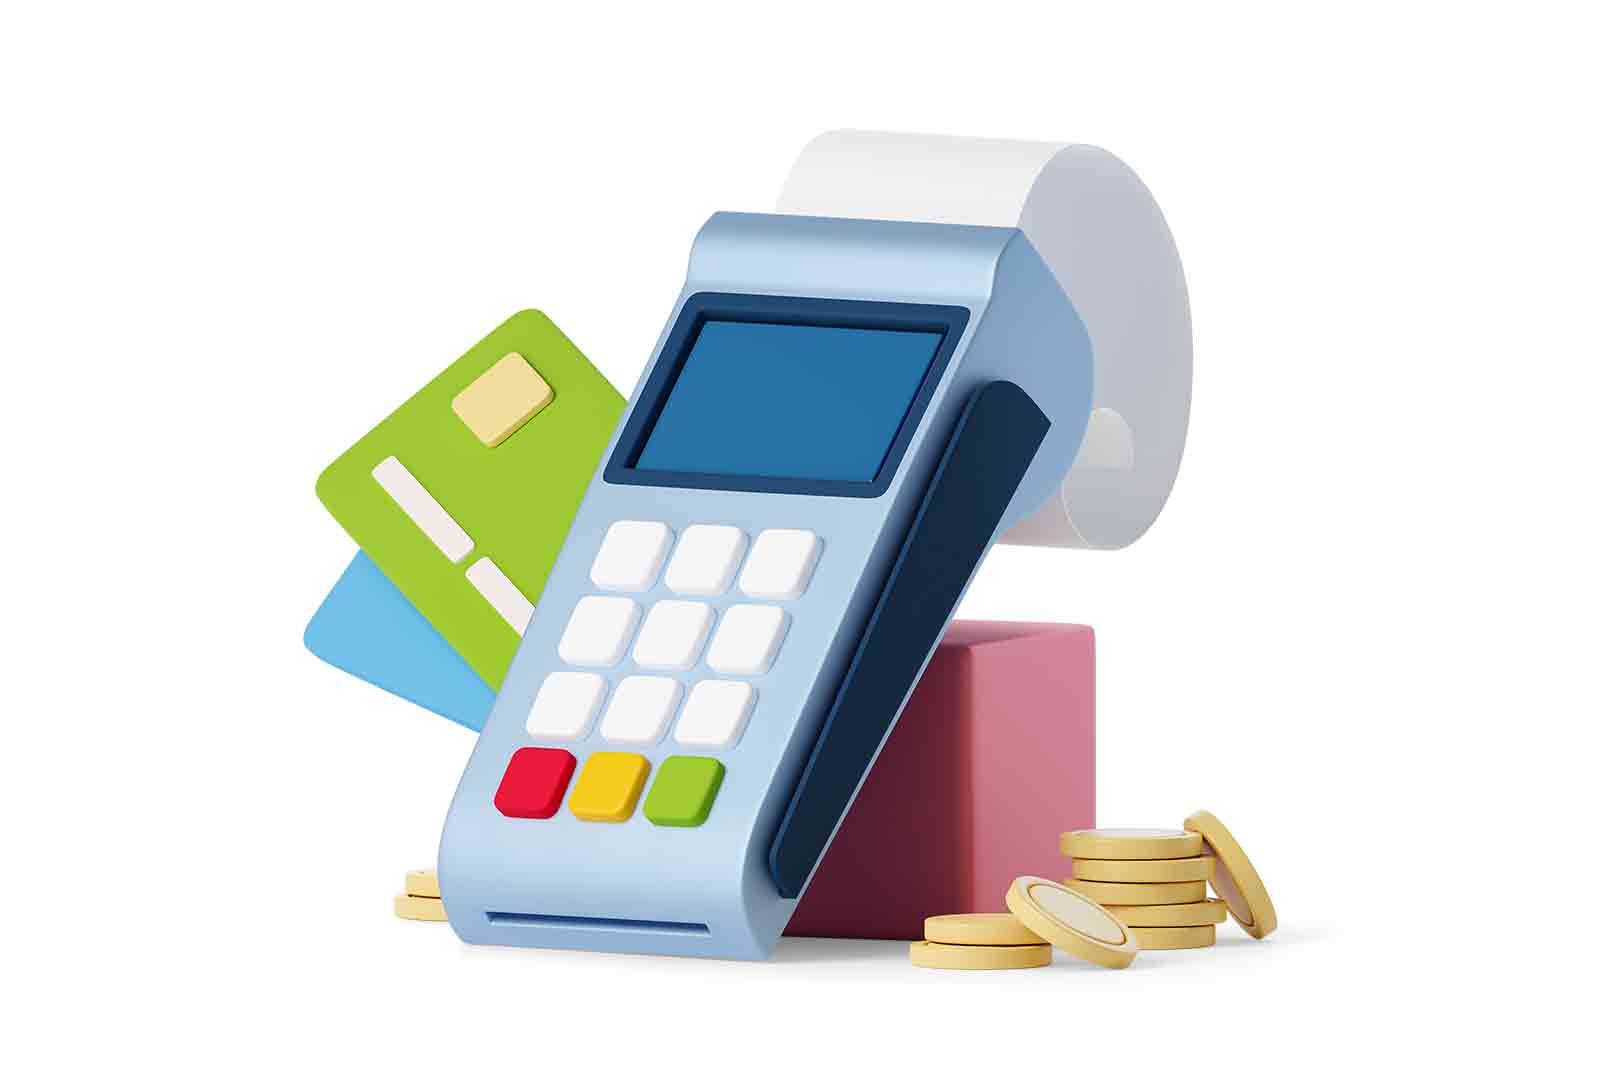 Bank terminal with cards and coins, processing nfc payments device 3d rendered illustration. POS terminal with receipt